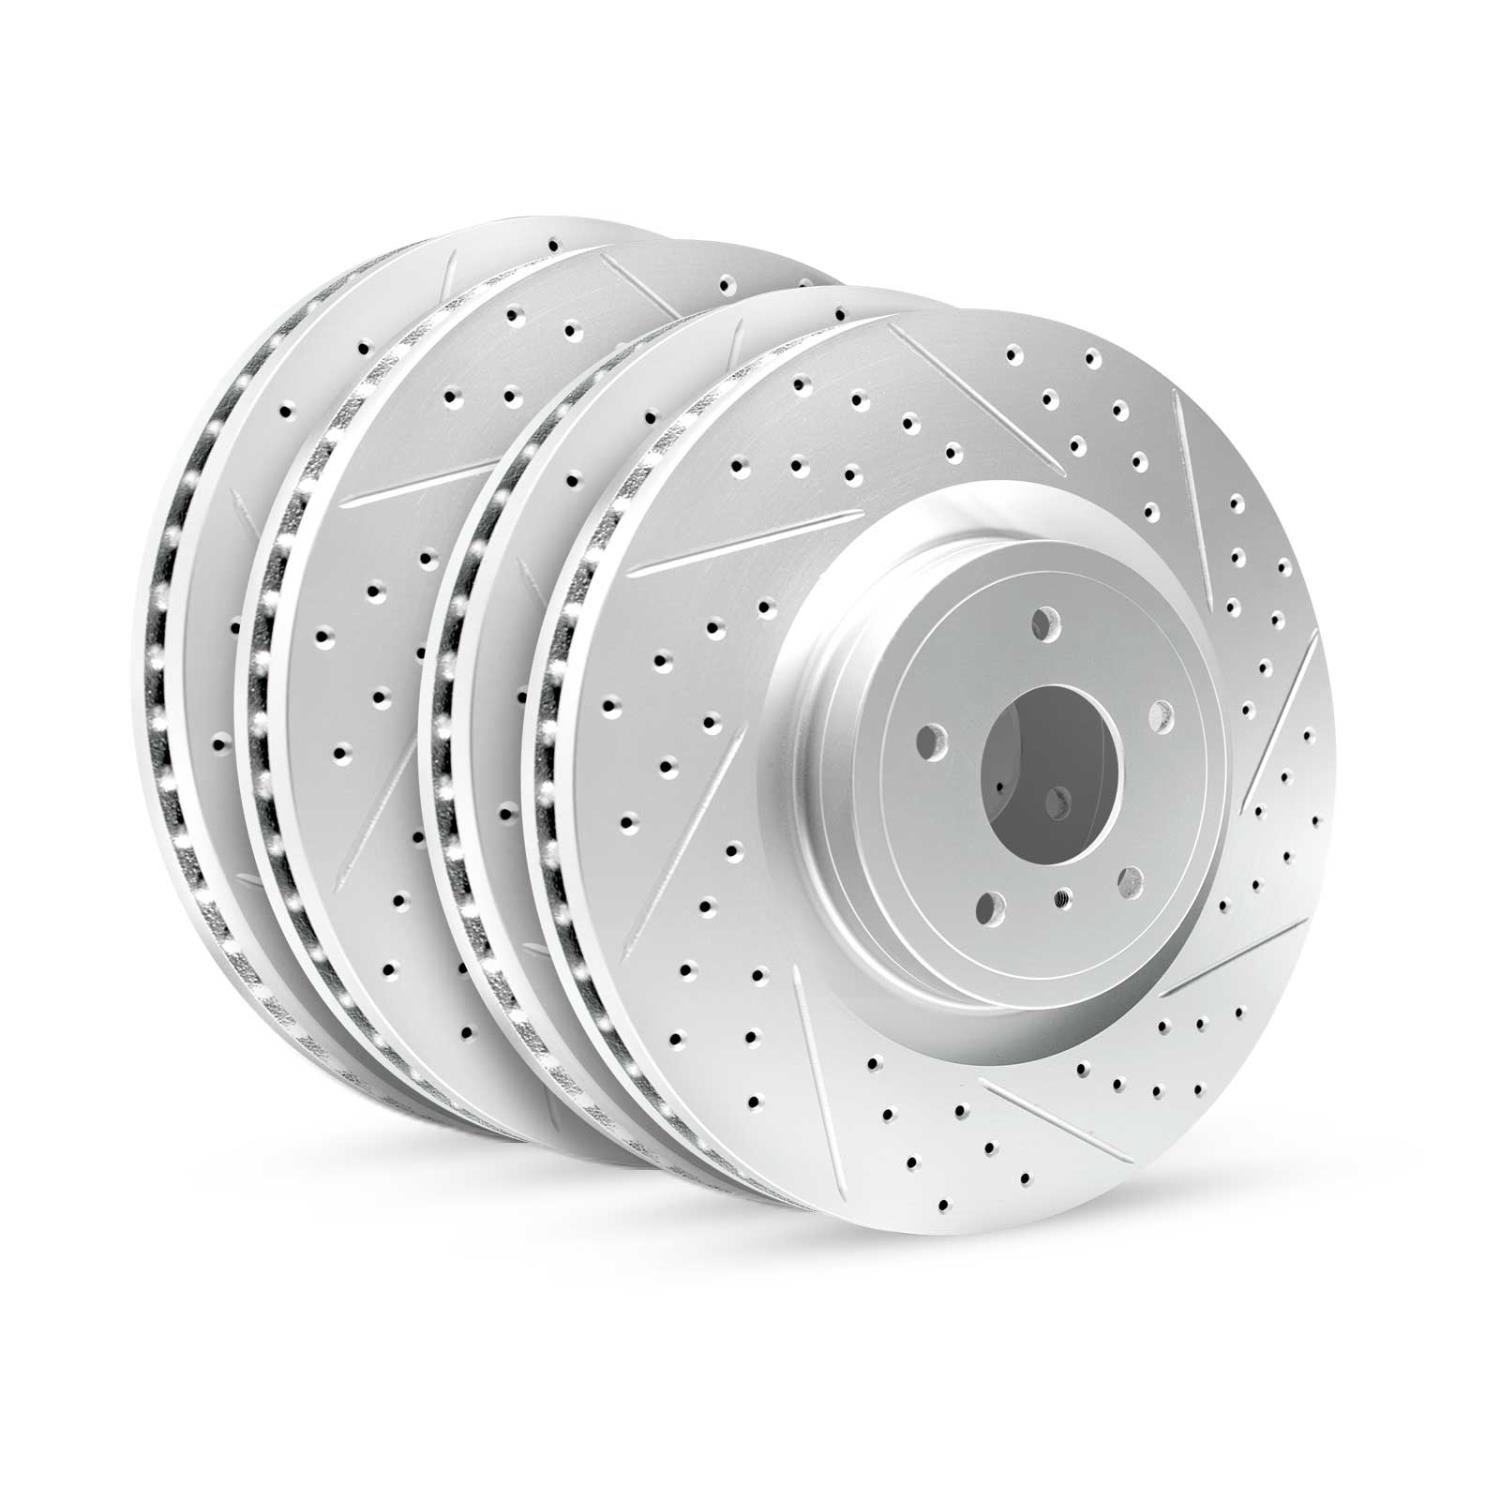 GEO-Carbon Drilled/Slotted Rotors, 2010-2012 Land Rover, Position: Front/Rear